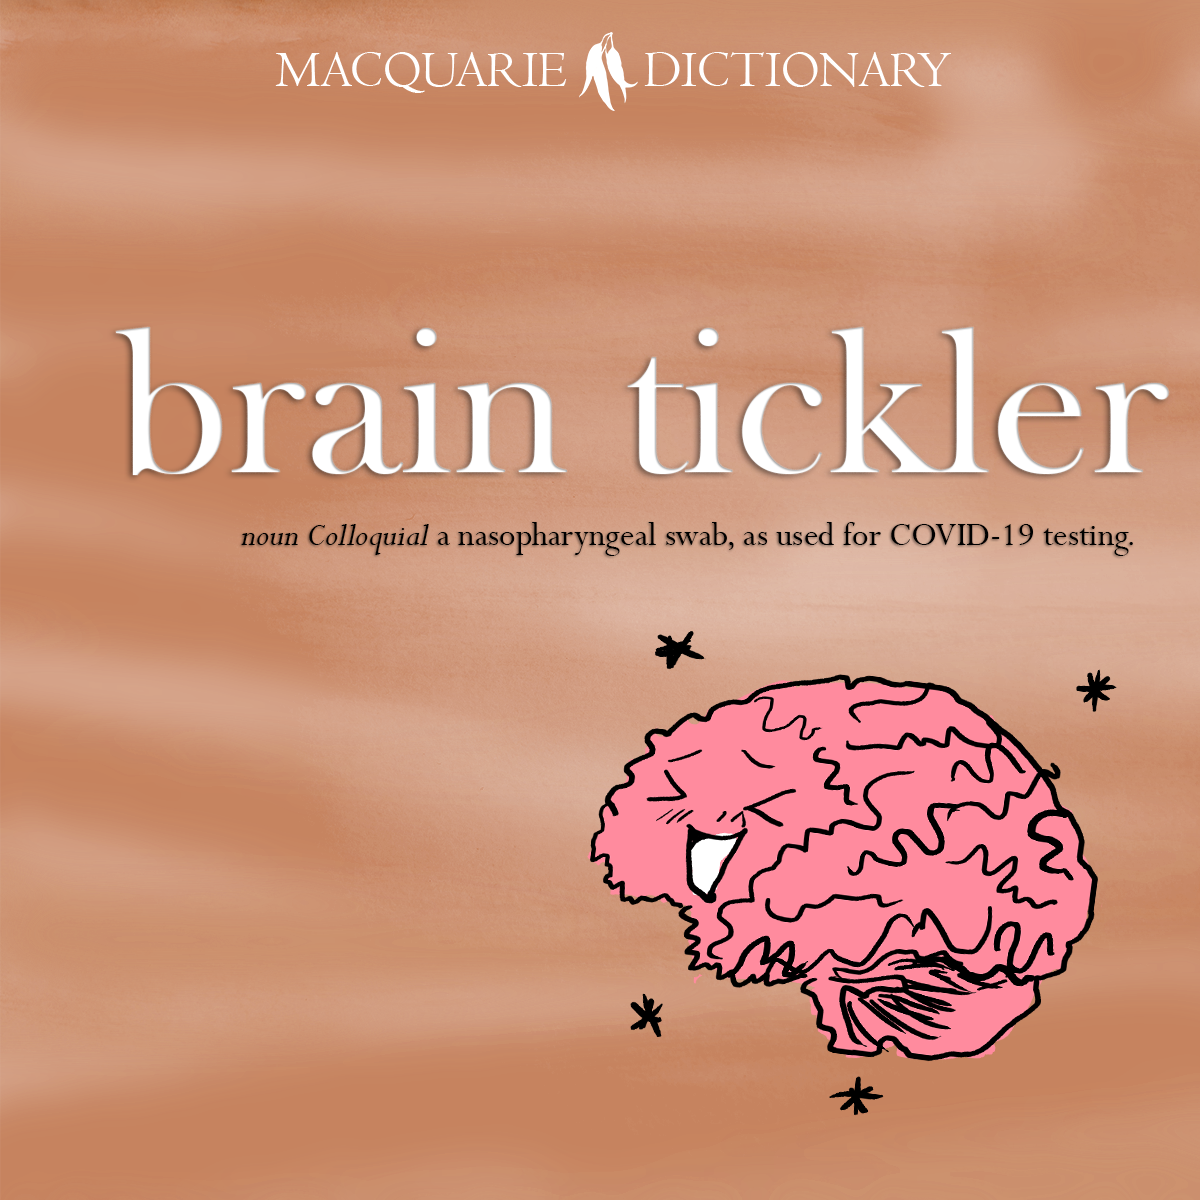 Word of the Year 2021 - brain tickler